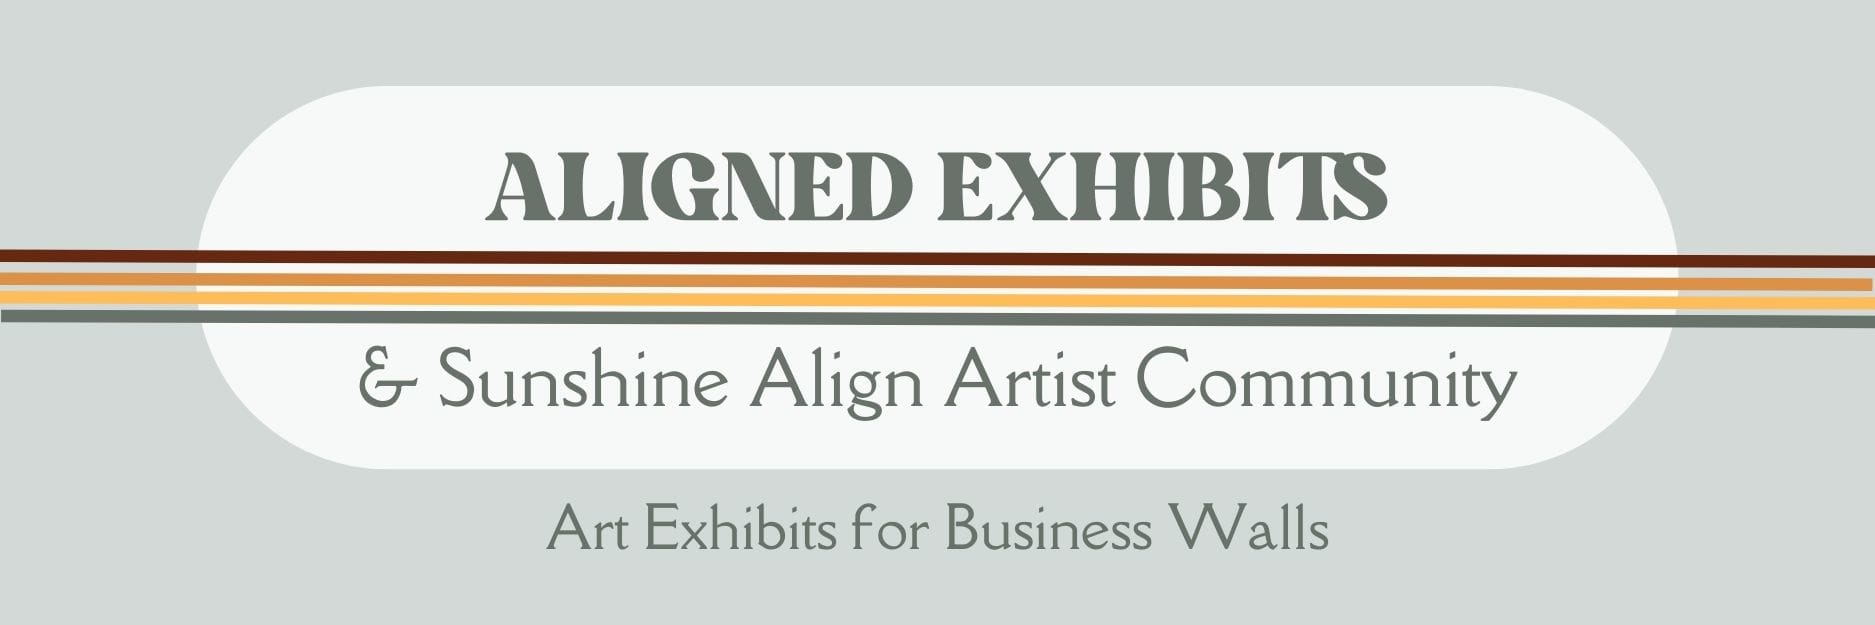 About Aligned Exhibits LLC